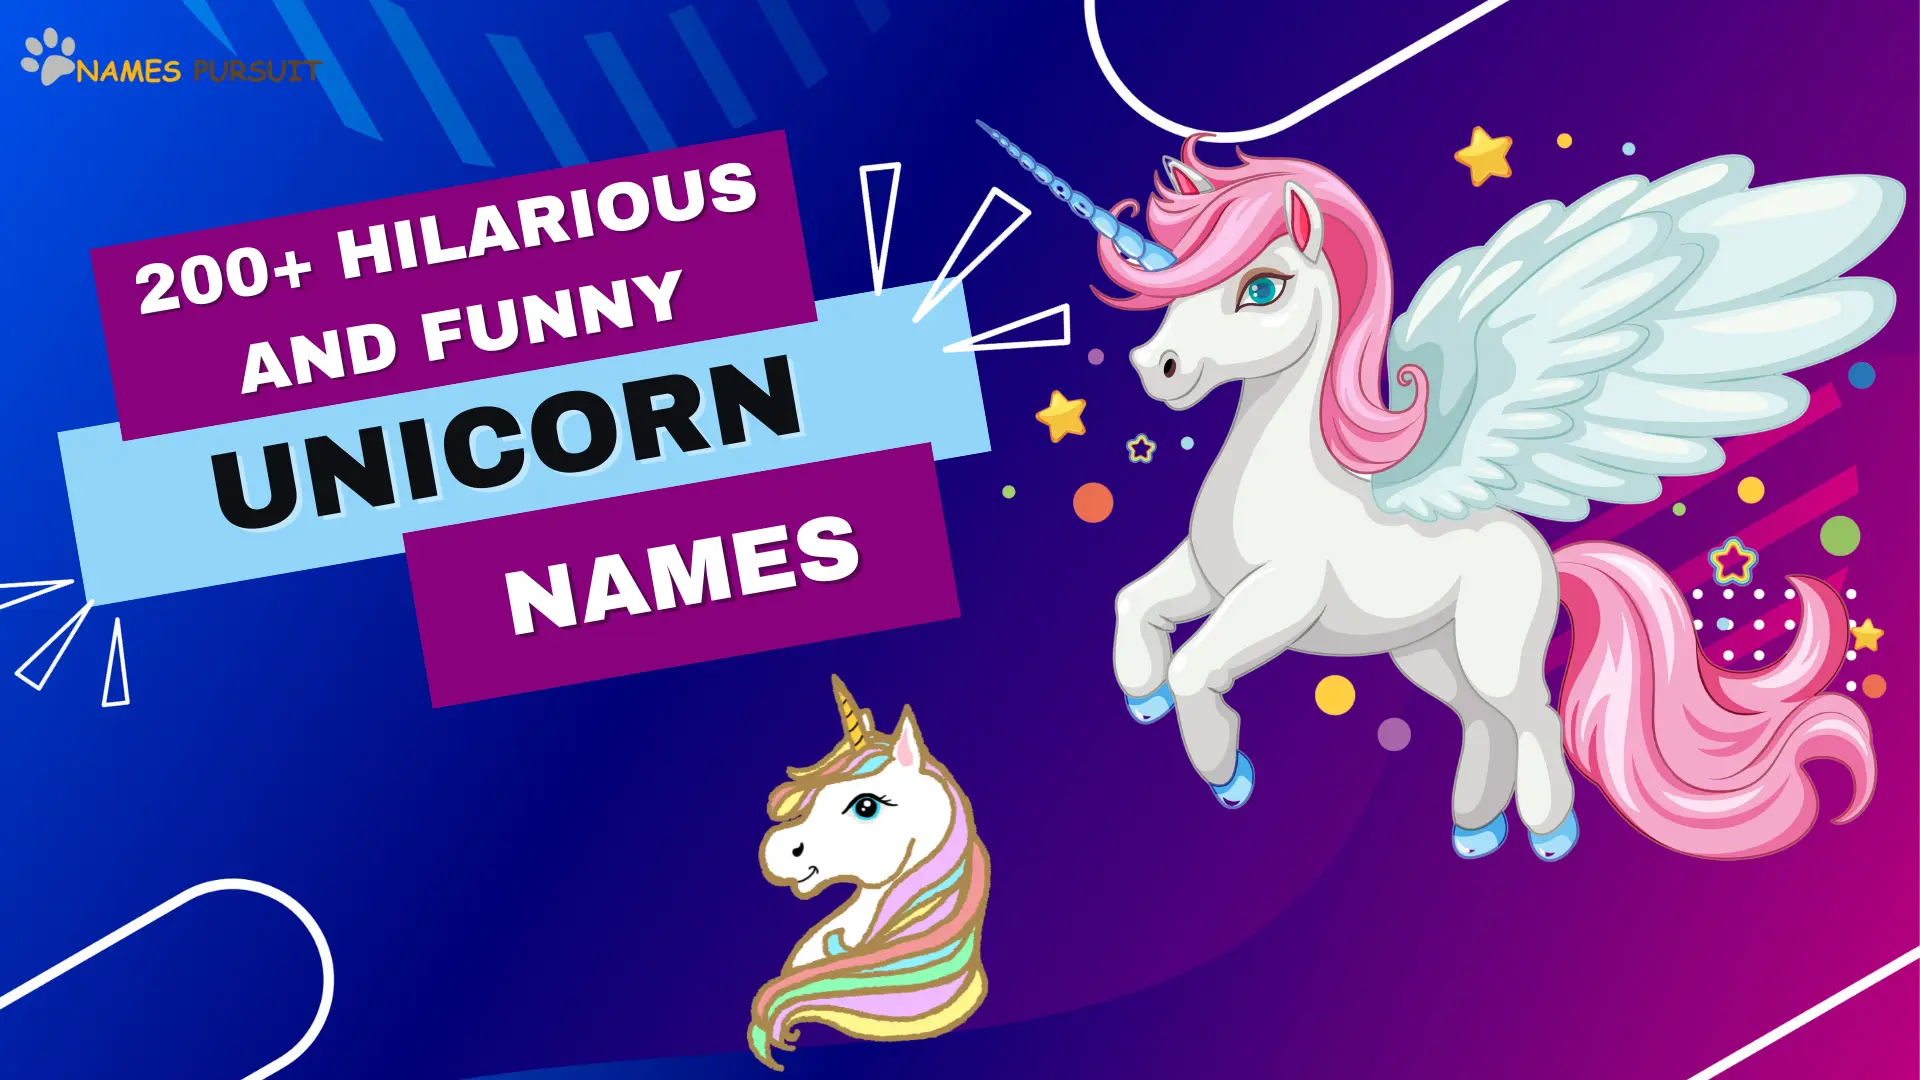 200+ Hilarious and Funny Unicorn Names